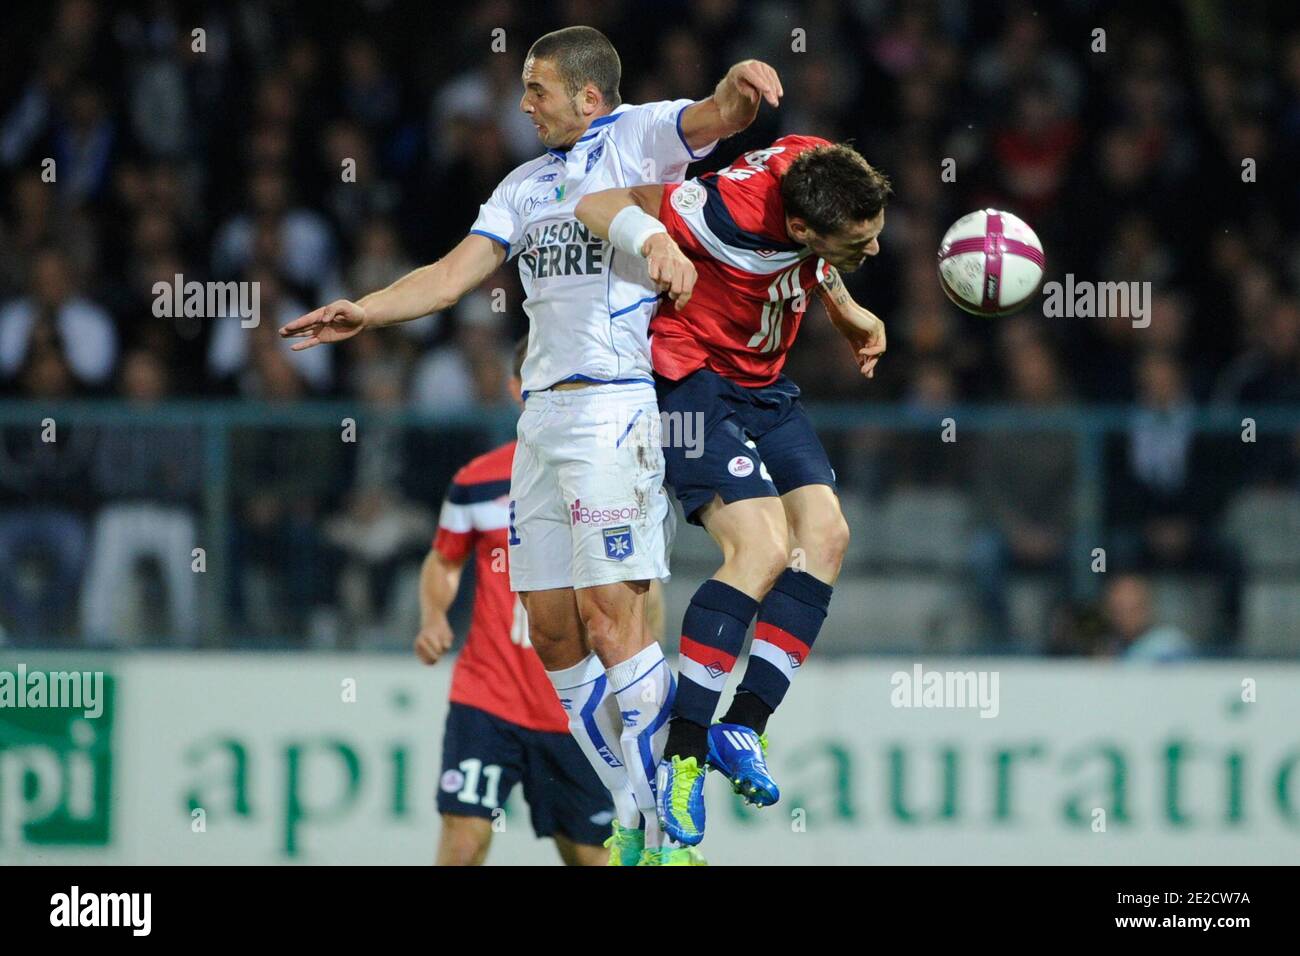 Auxerre's Ben Sahar battling Lille's Mathieu Debuchy during the French First League soccer match, AJ Auxerre vs Lille OSC in Auxerre, France, on October 15, 2011. Lille won 3-1. Photo by Henri Szwarc/ABACAPRESS.COM Stock Photo